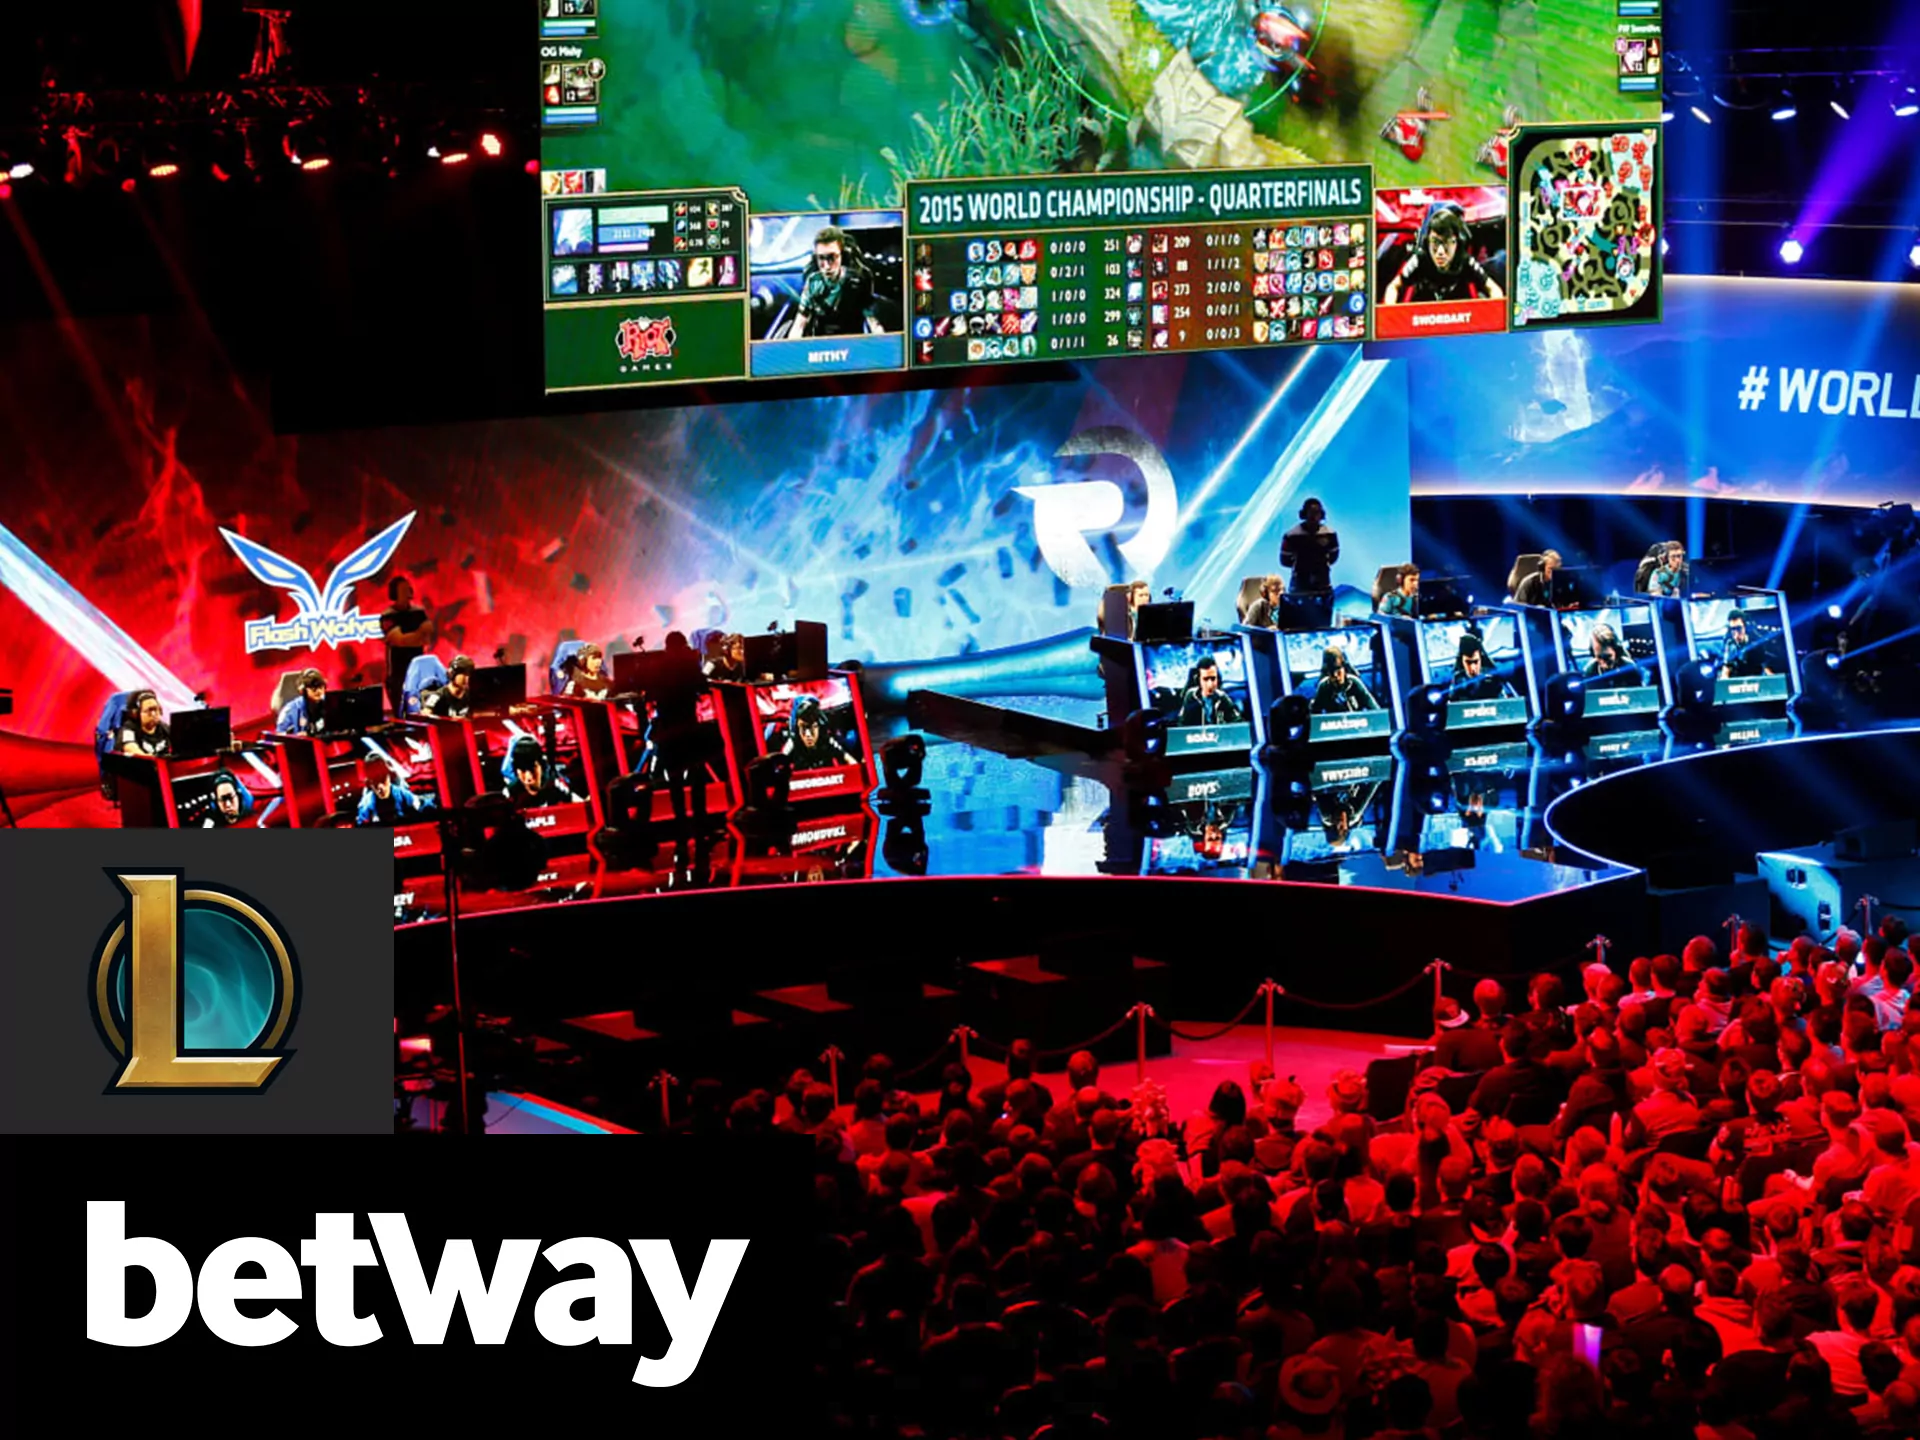 League of Legends betting on Betway.